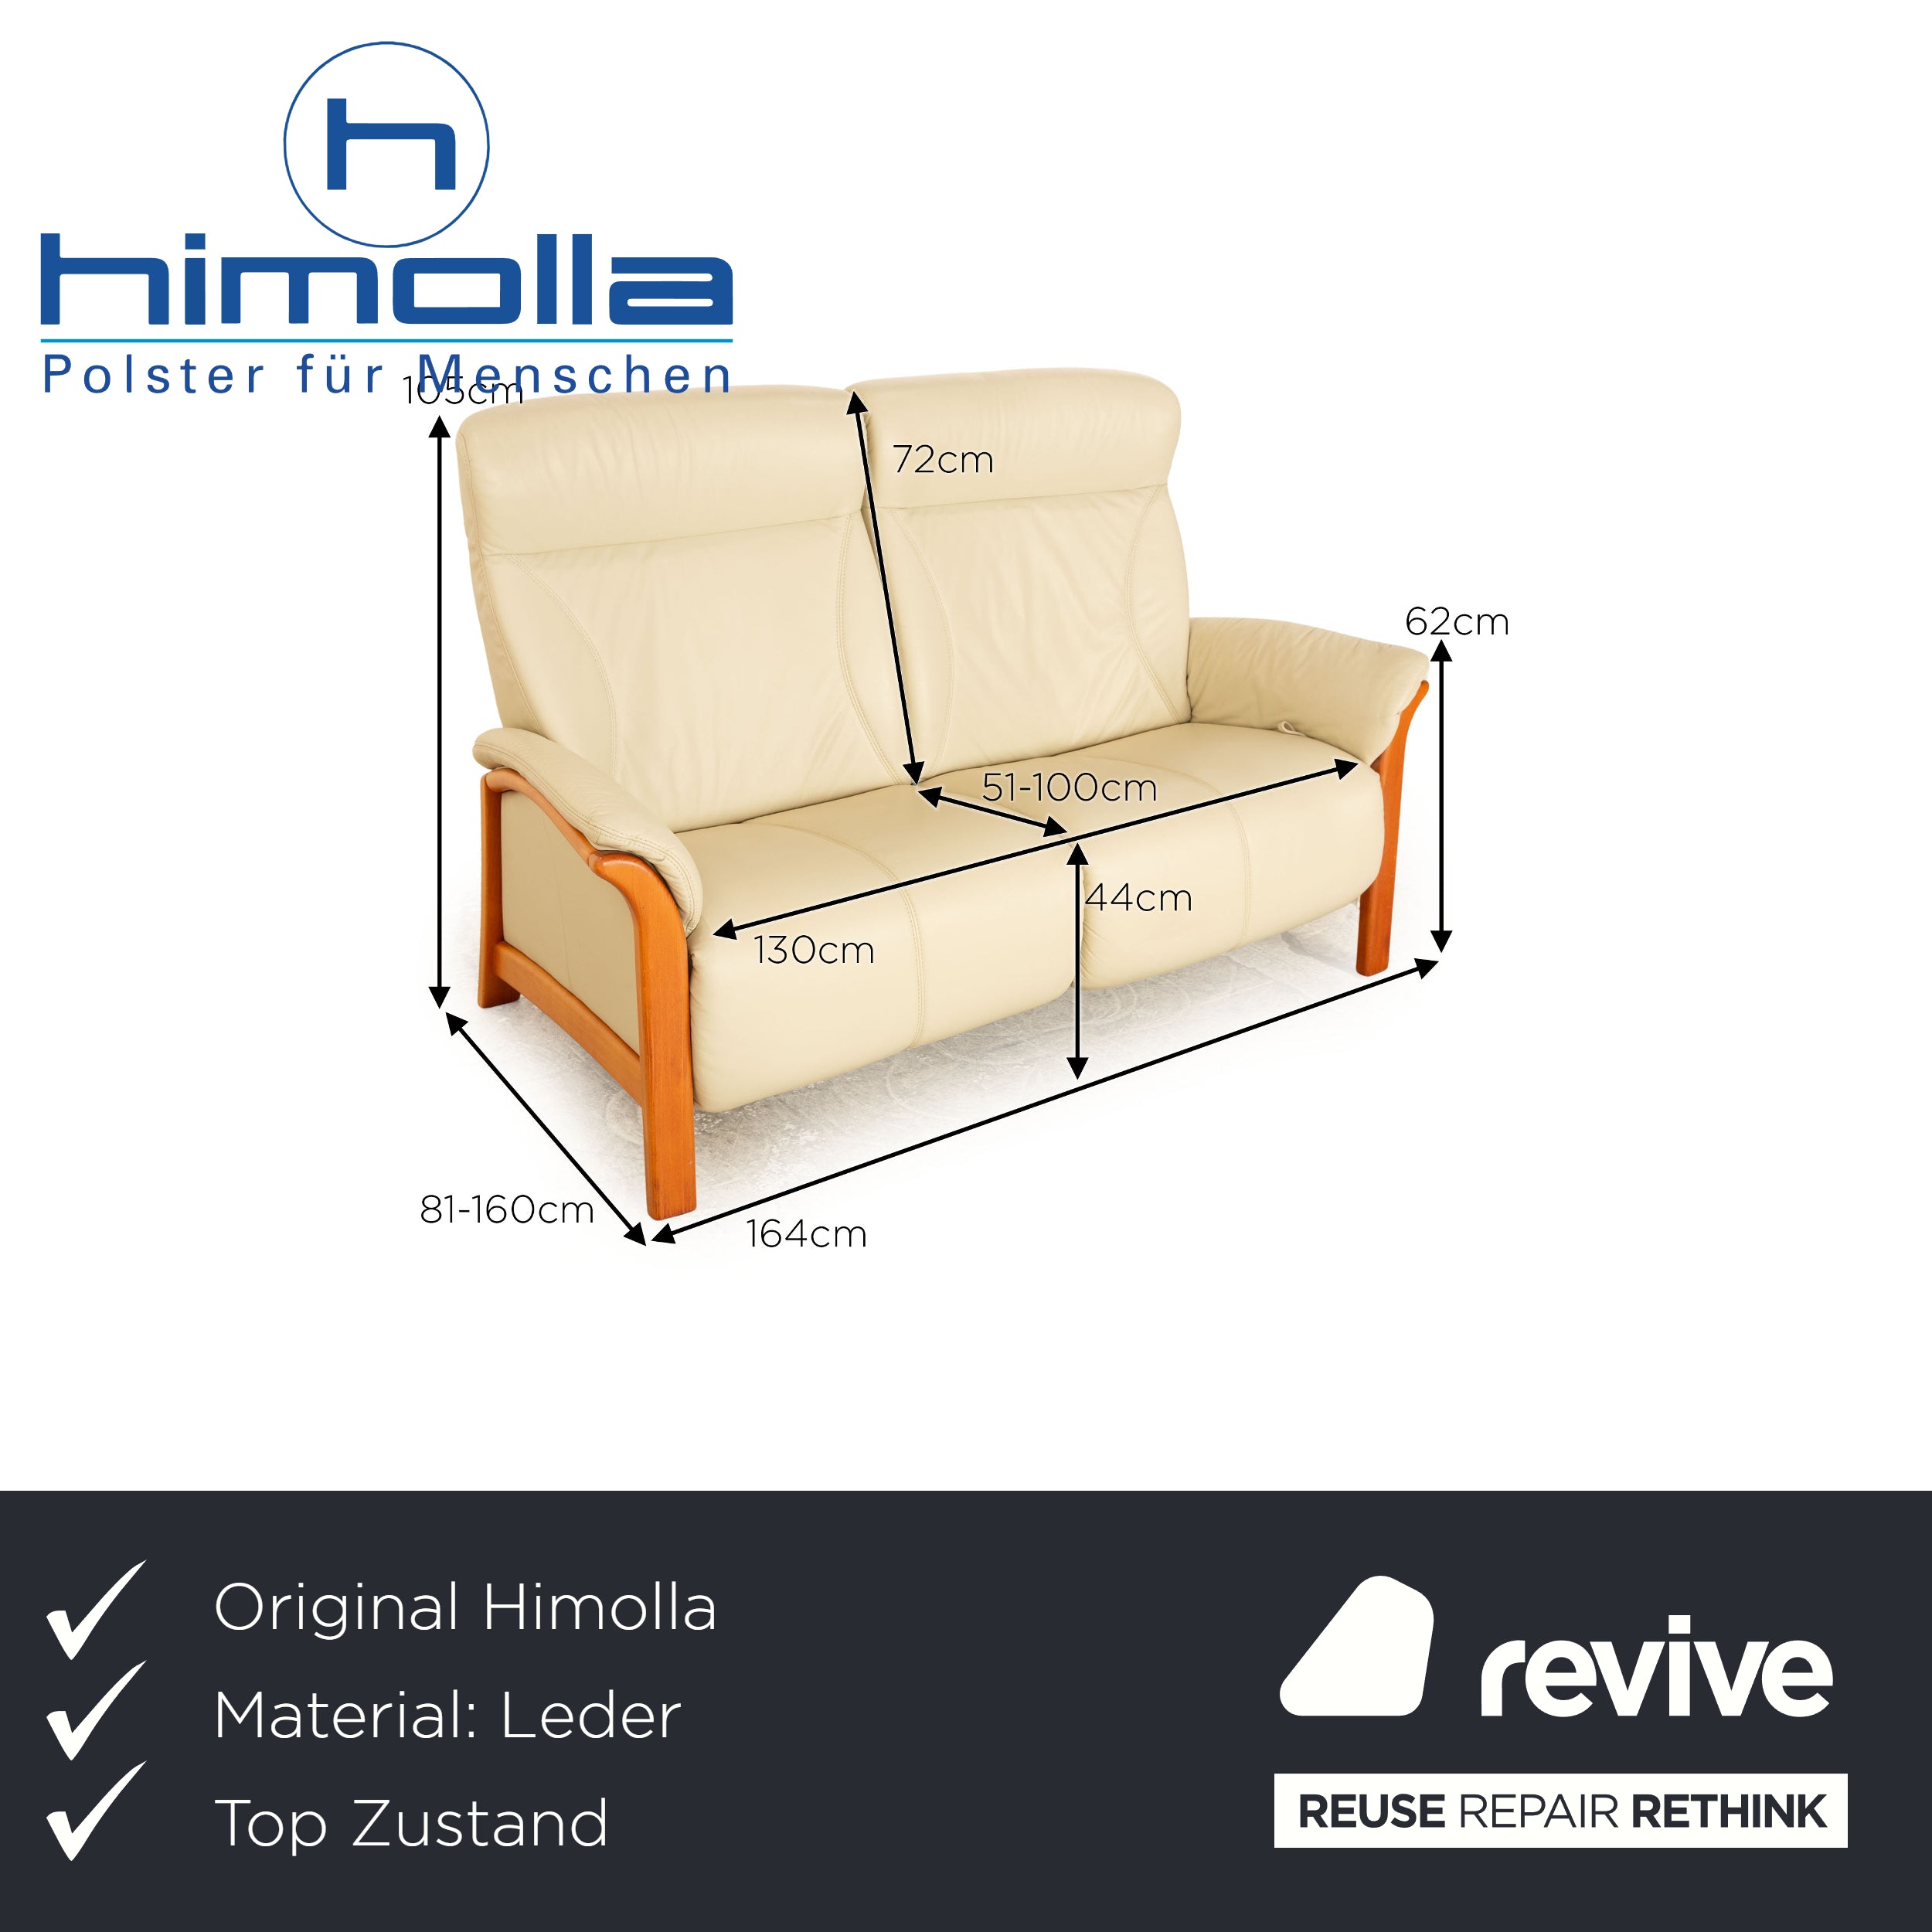 Himolla Cumuly Leder Zweisitzer Creme manuelle Funktion Sofa Couch Relaxfunktion